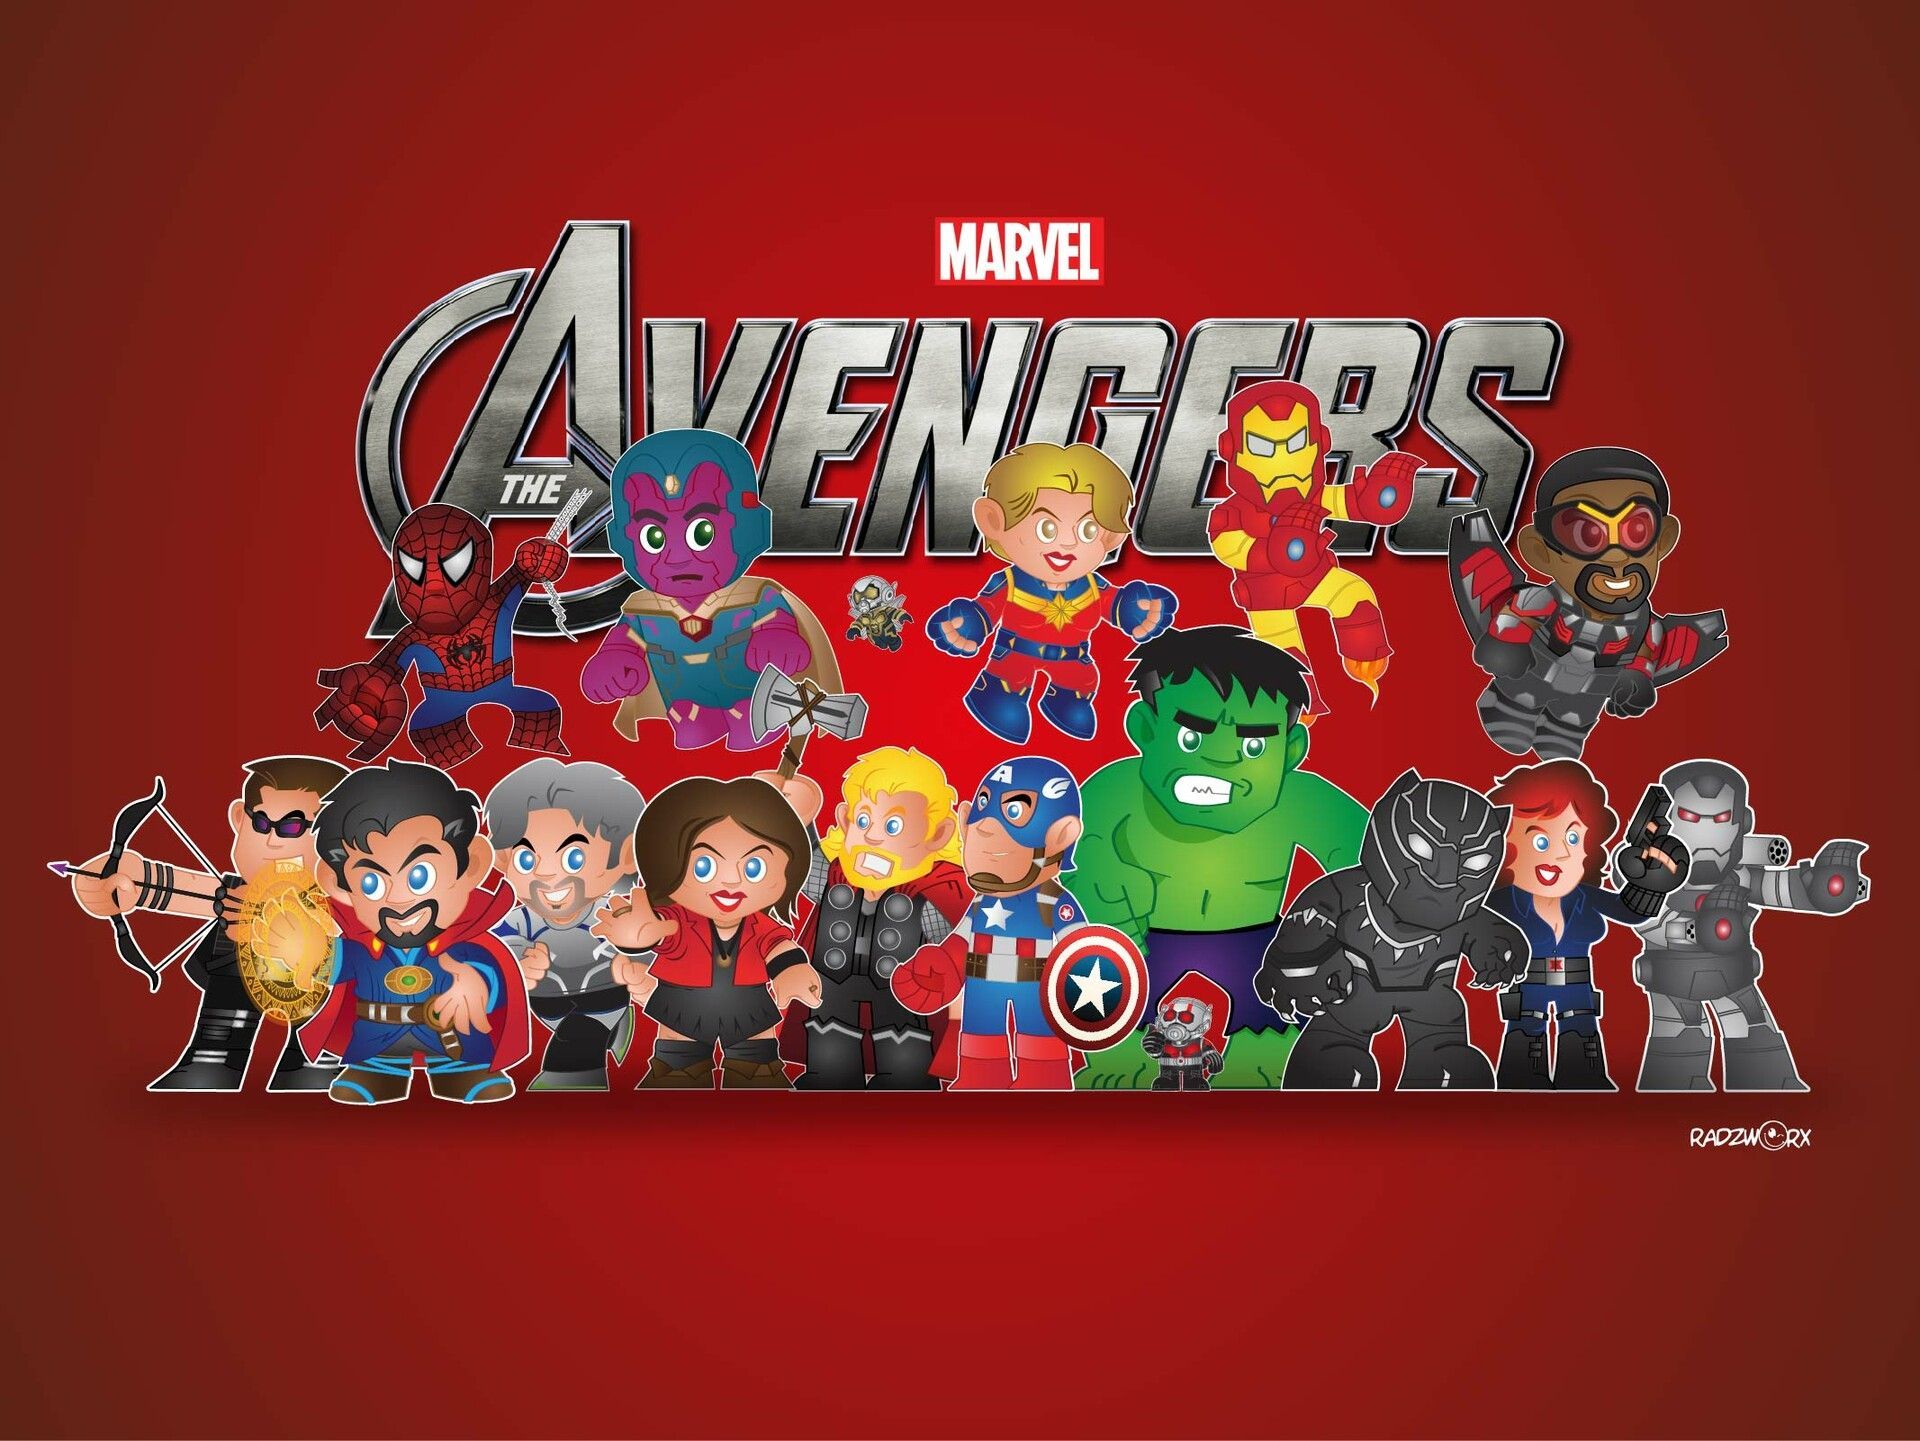 Download Pixel 3xl Marvels Avengers Background In A Chibi Form  Wallpapers com